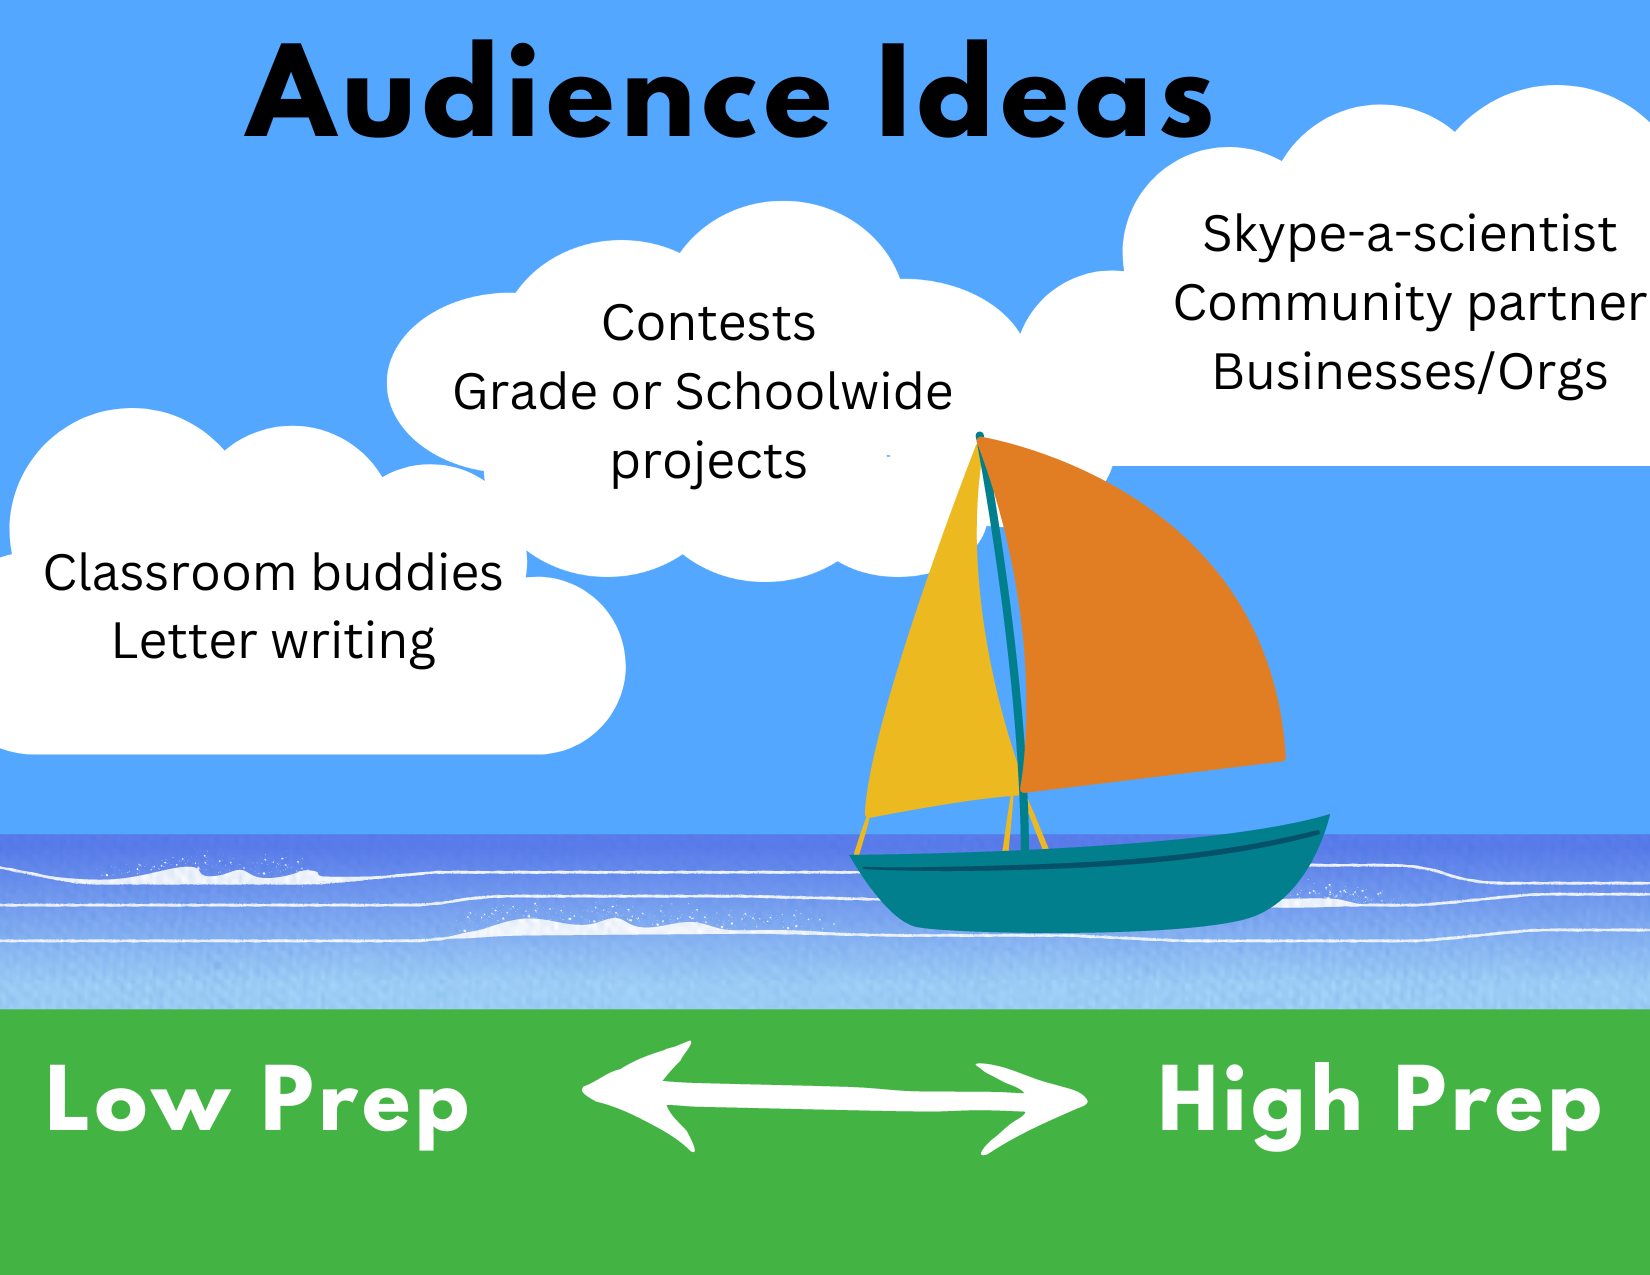 Low to high prep audience ideas